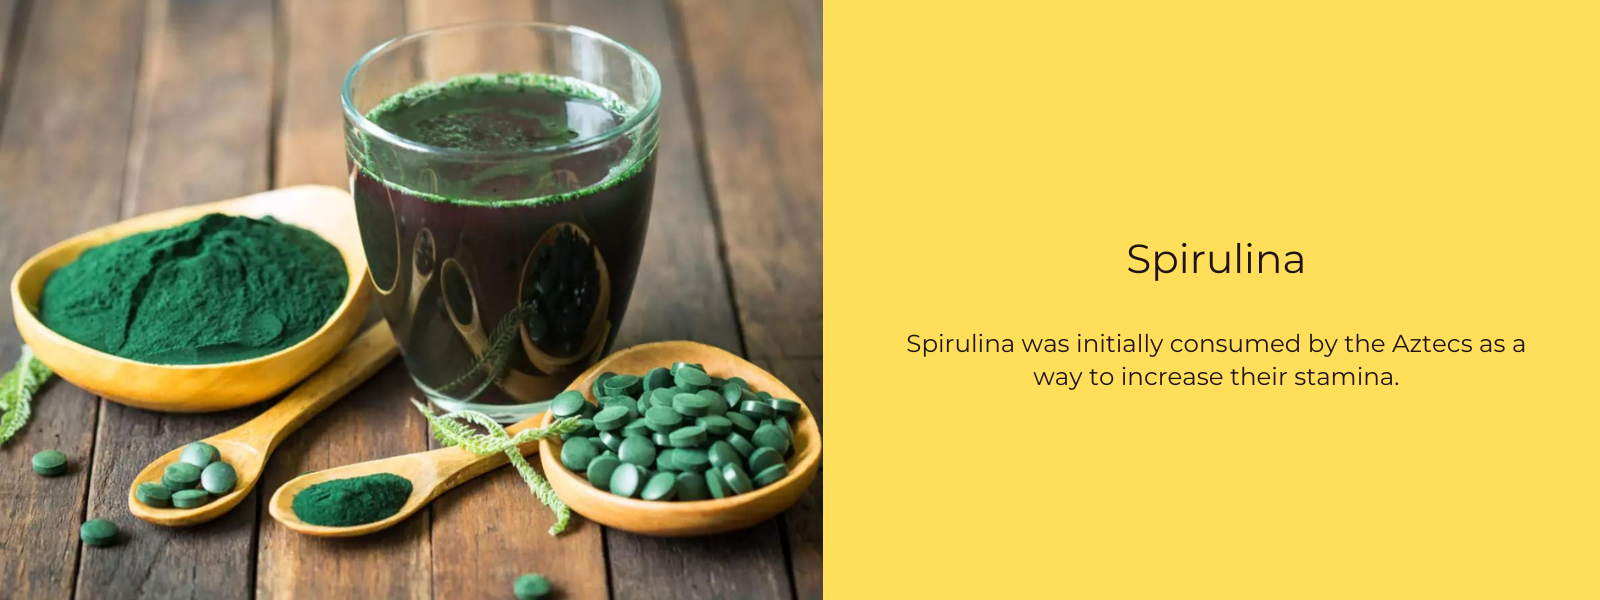 Spirulina – Health Benefits, Uses and Important Facts